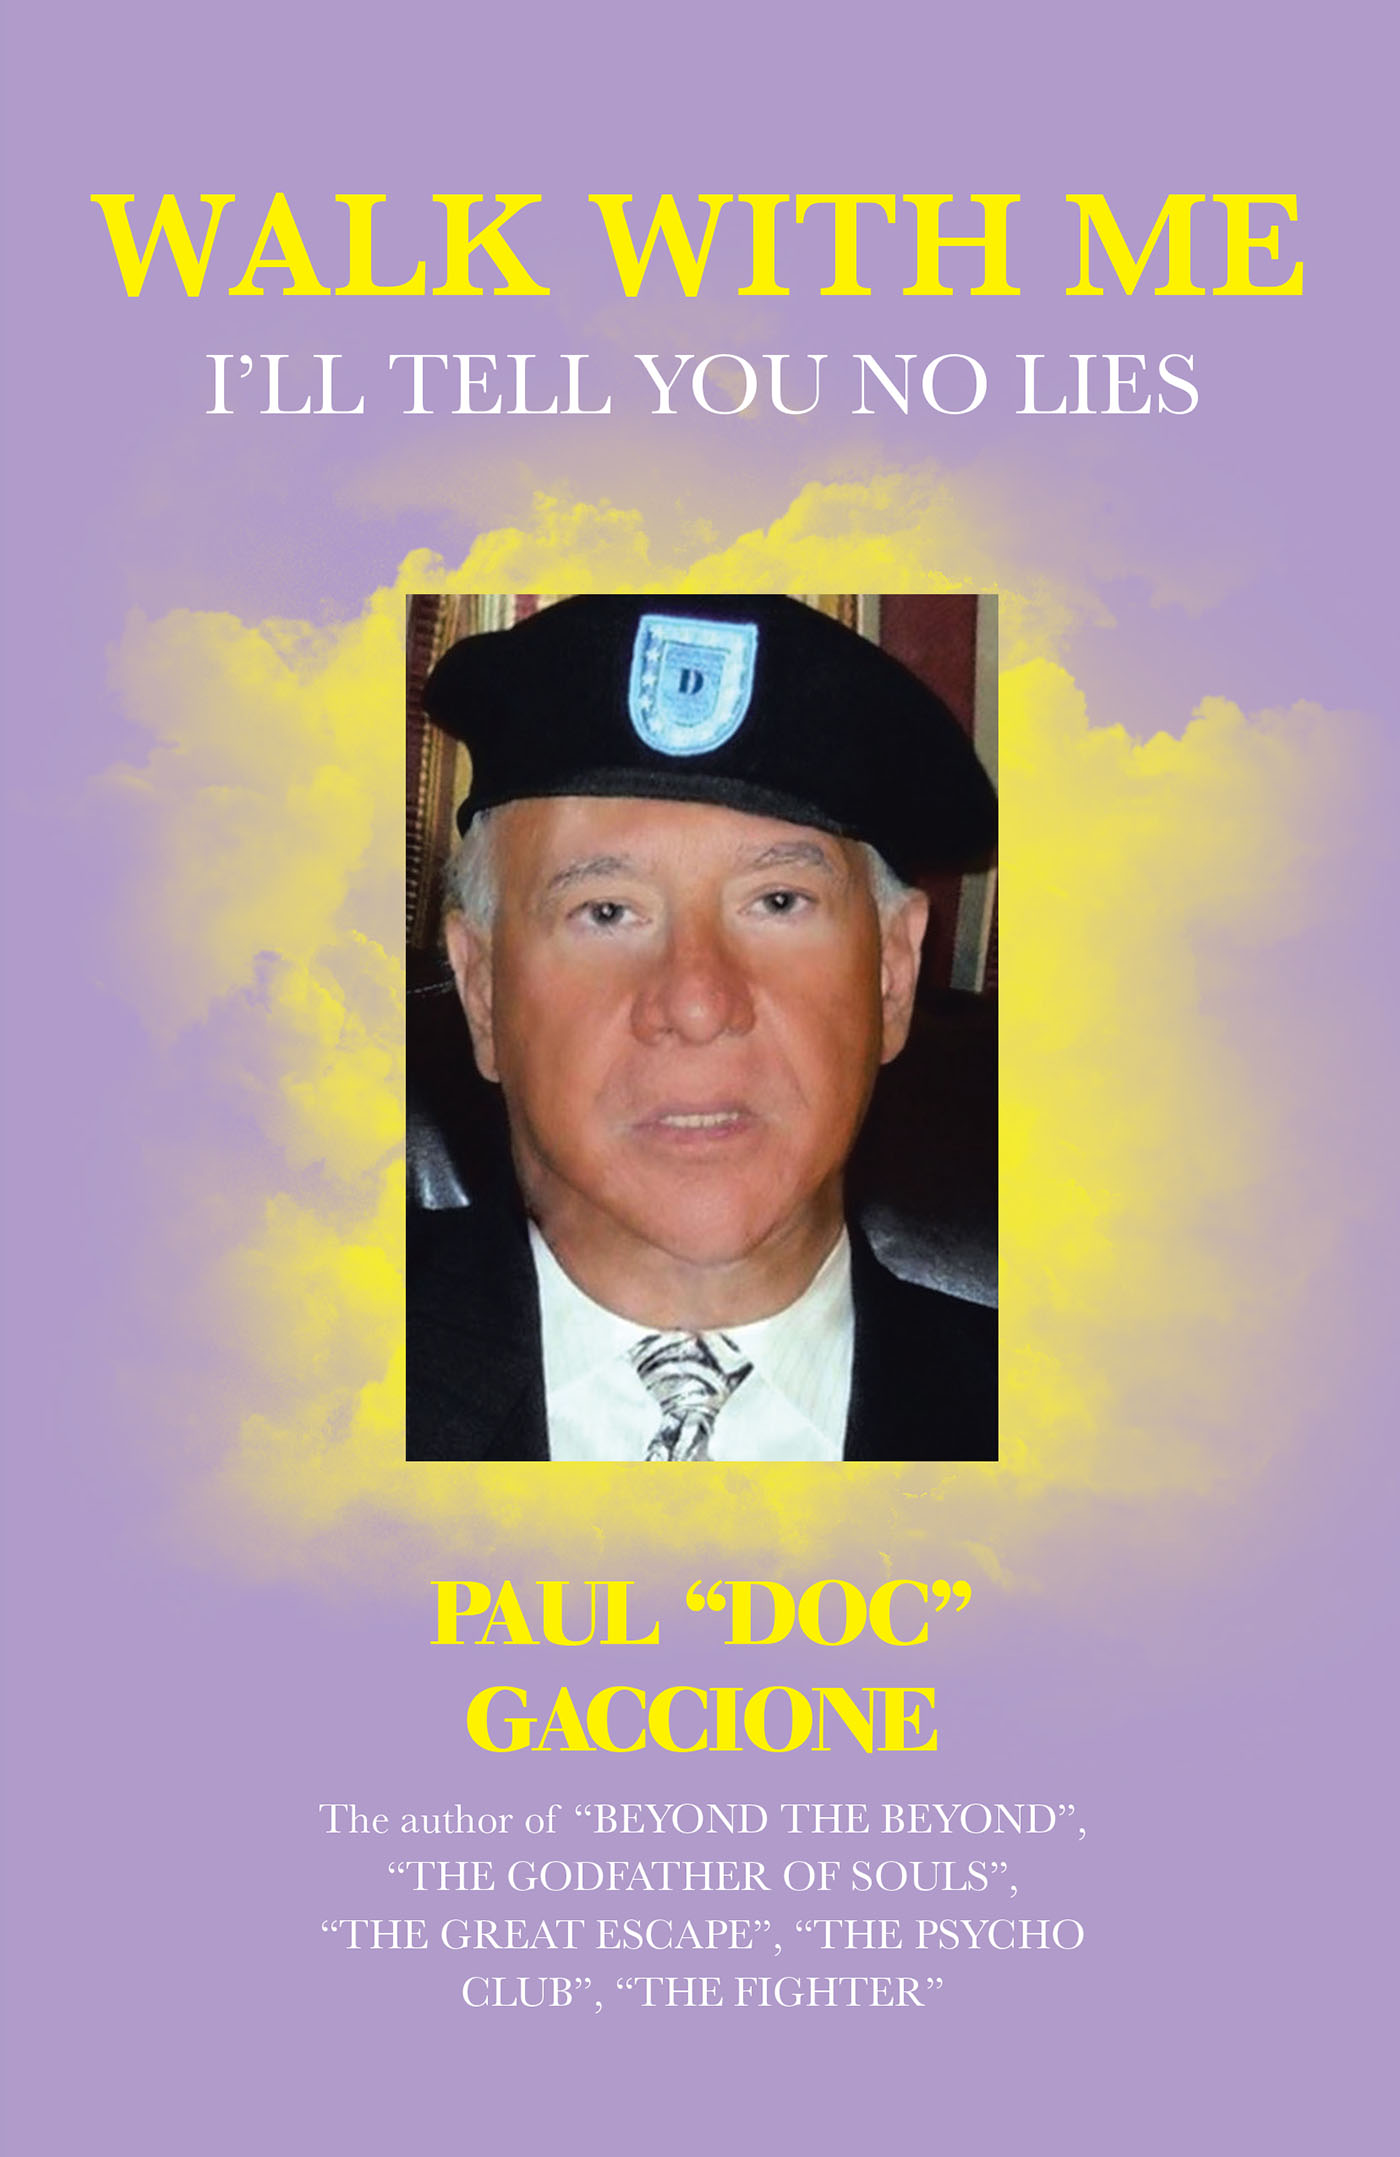 Author Paul "Doc" Gaccione’s New Book, "Walk with Me: I’ll Tell You No Lies," Shares the Author’s Eye-Opening Experience with the Mafia